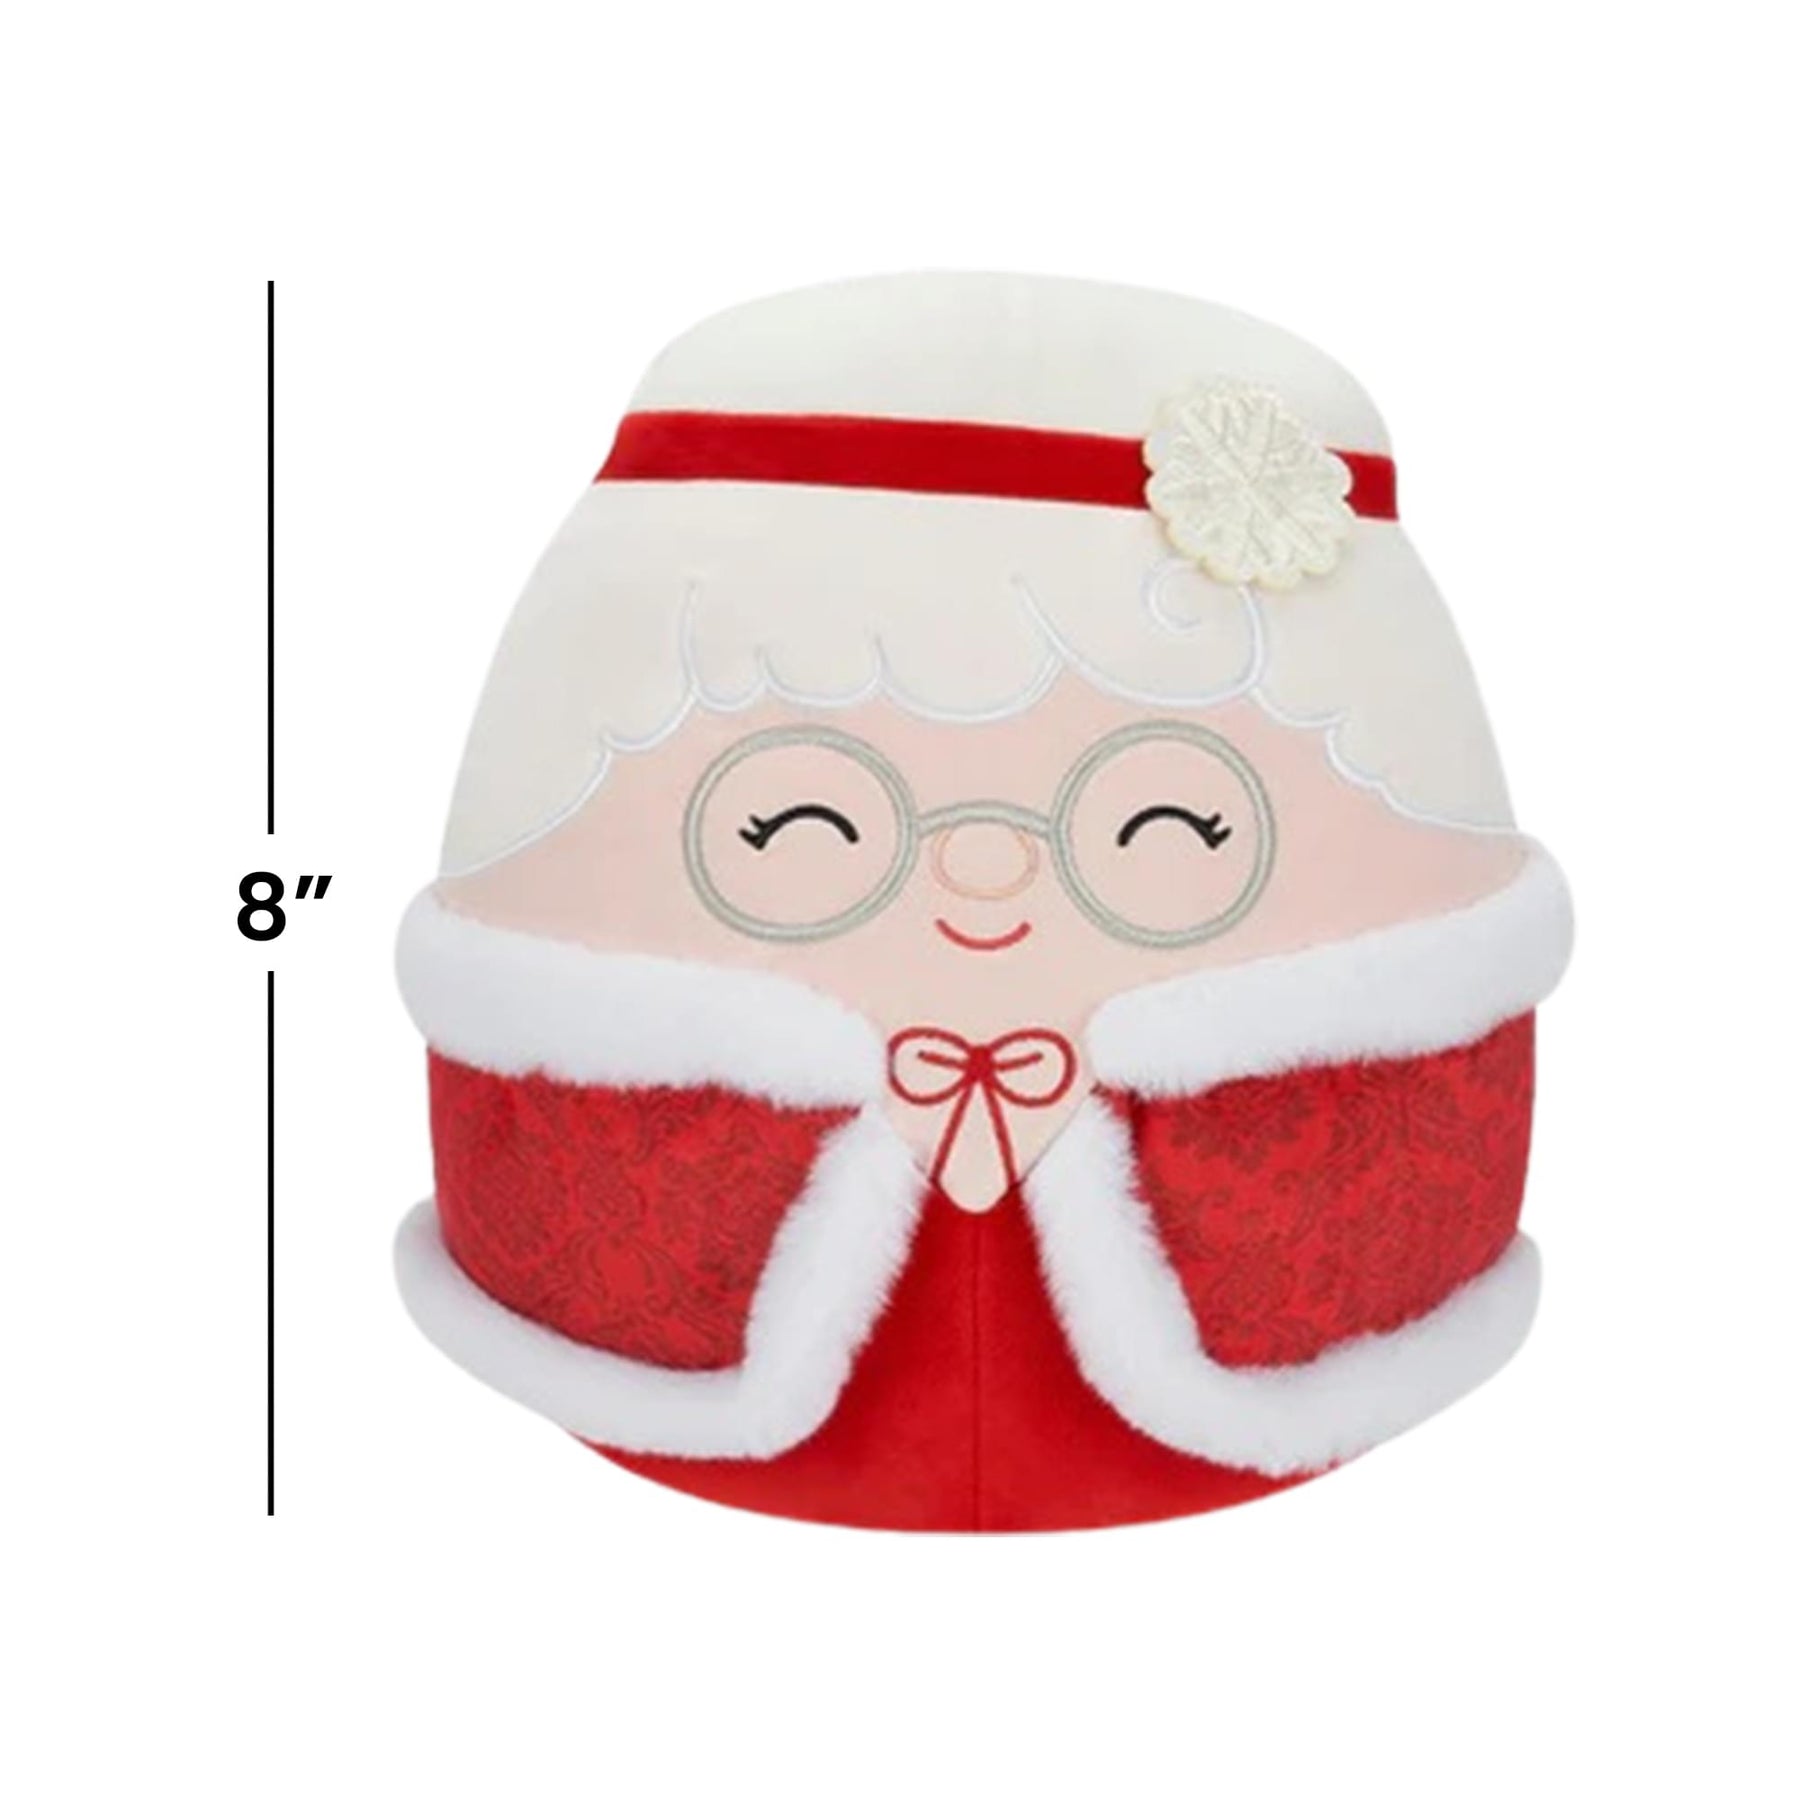 Squishmallow 8 Inch Holiday Plush | Nicolette the Mrs. Claus